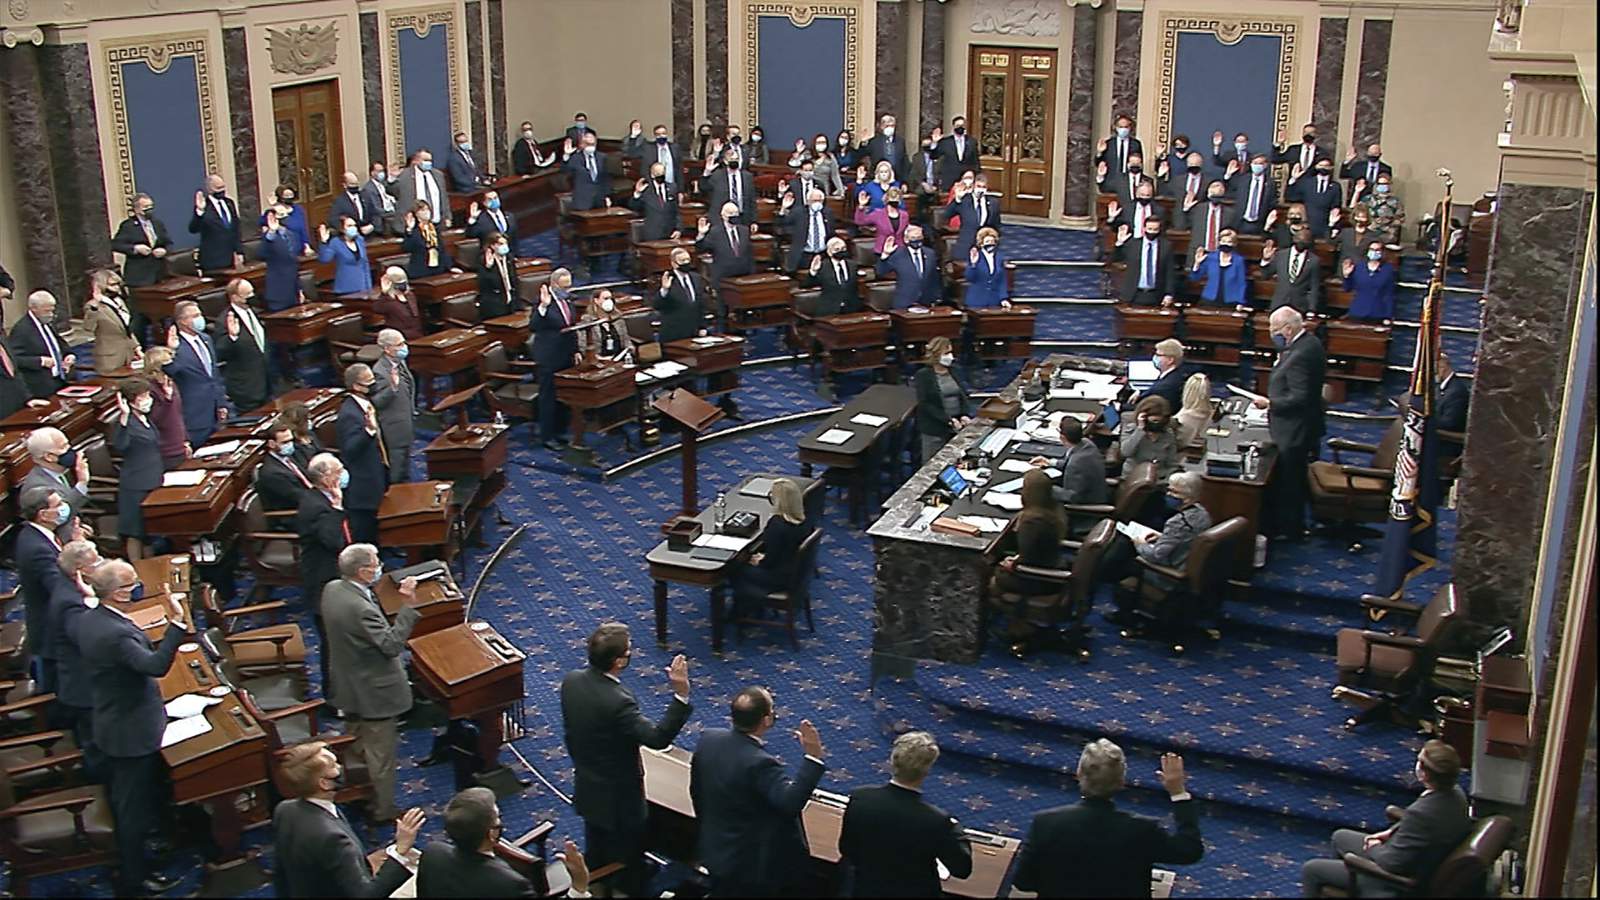 WATCH LIVE: Senate takes ceremonial steps to start Donald Trump’s impeachment trial